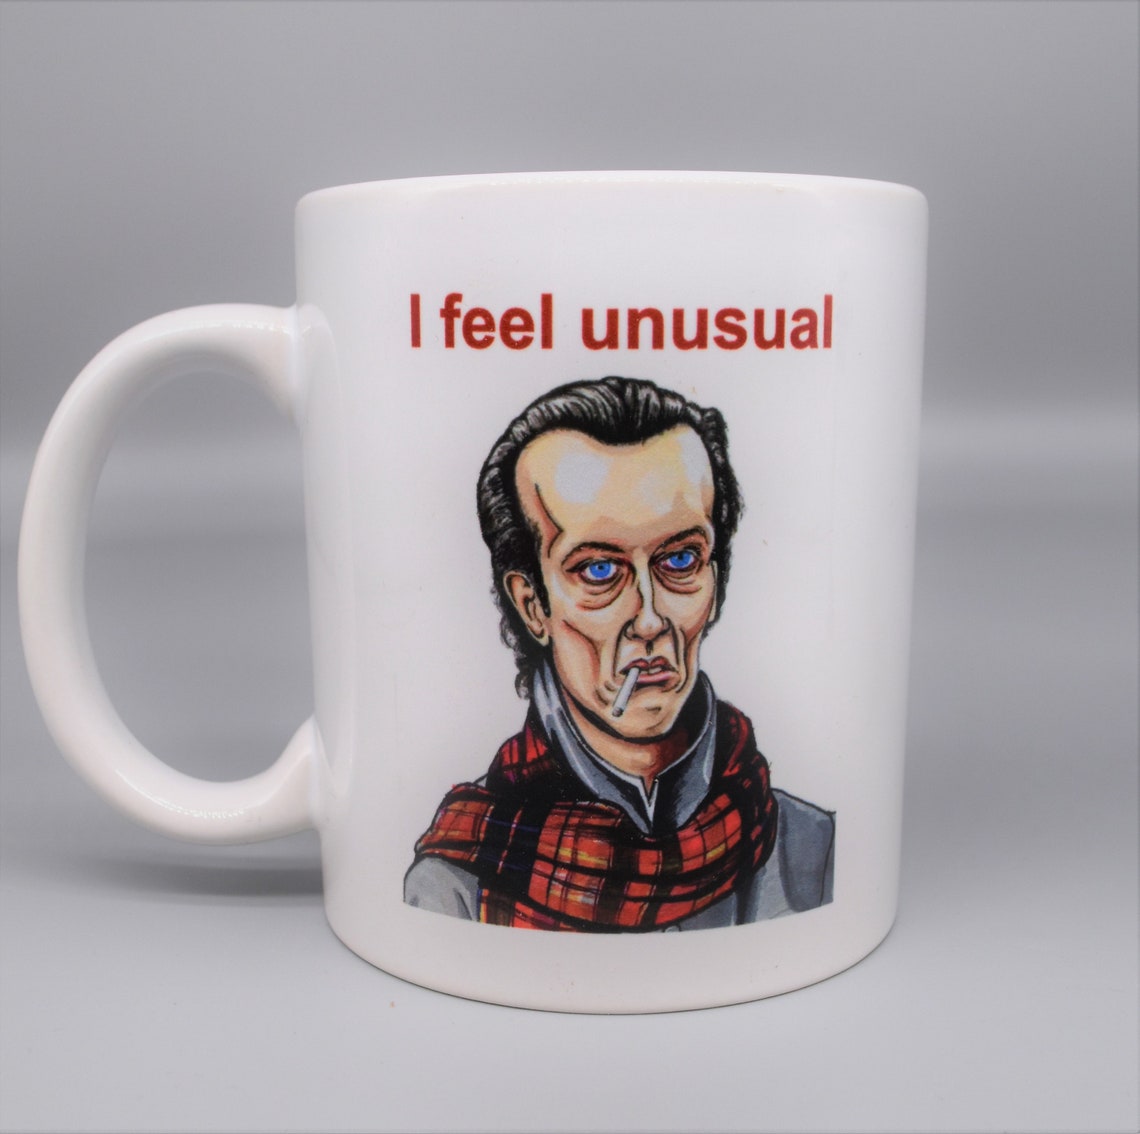 Withnail & I Quote Mug I demand to have some | Etsy